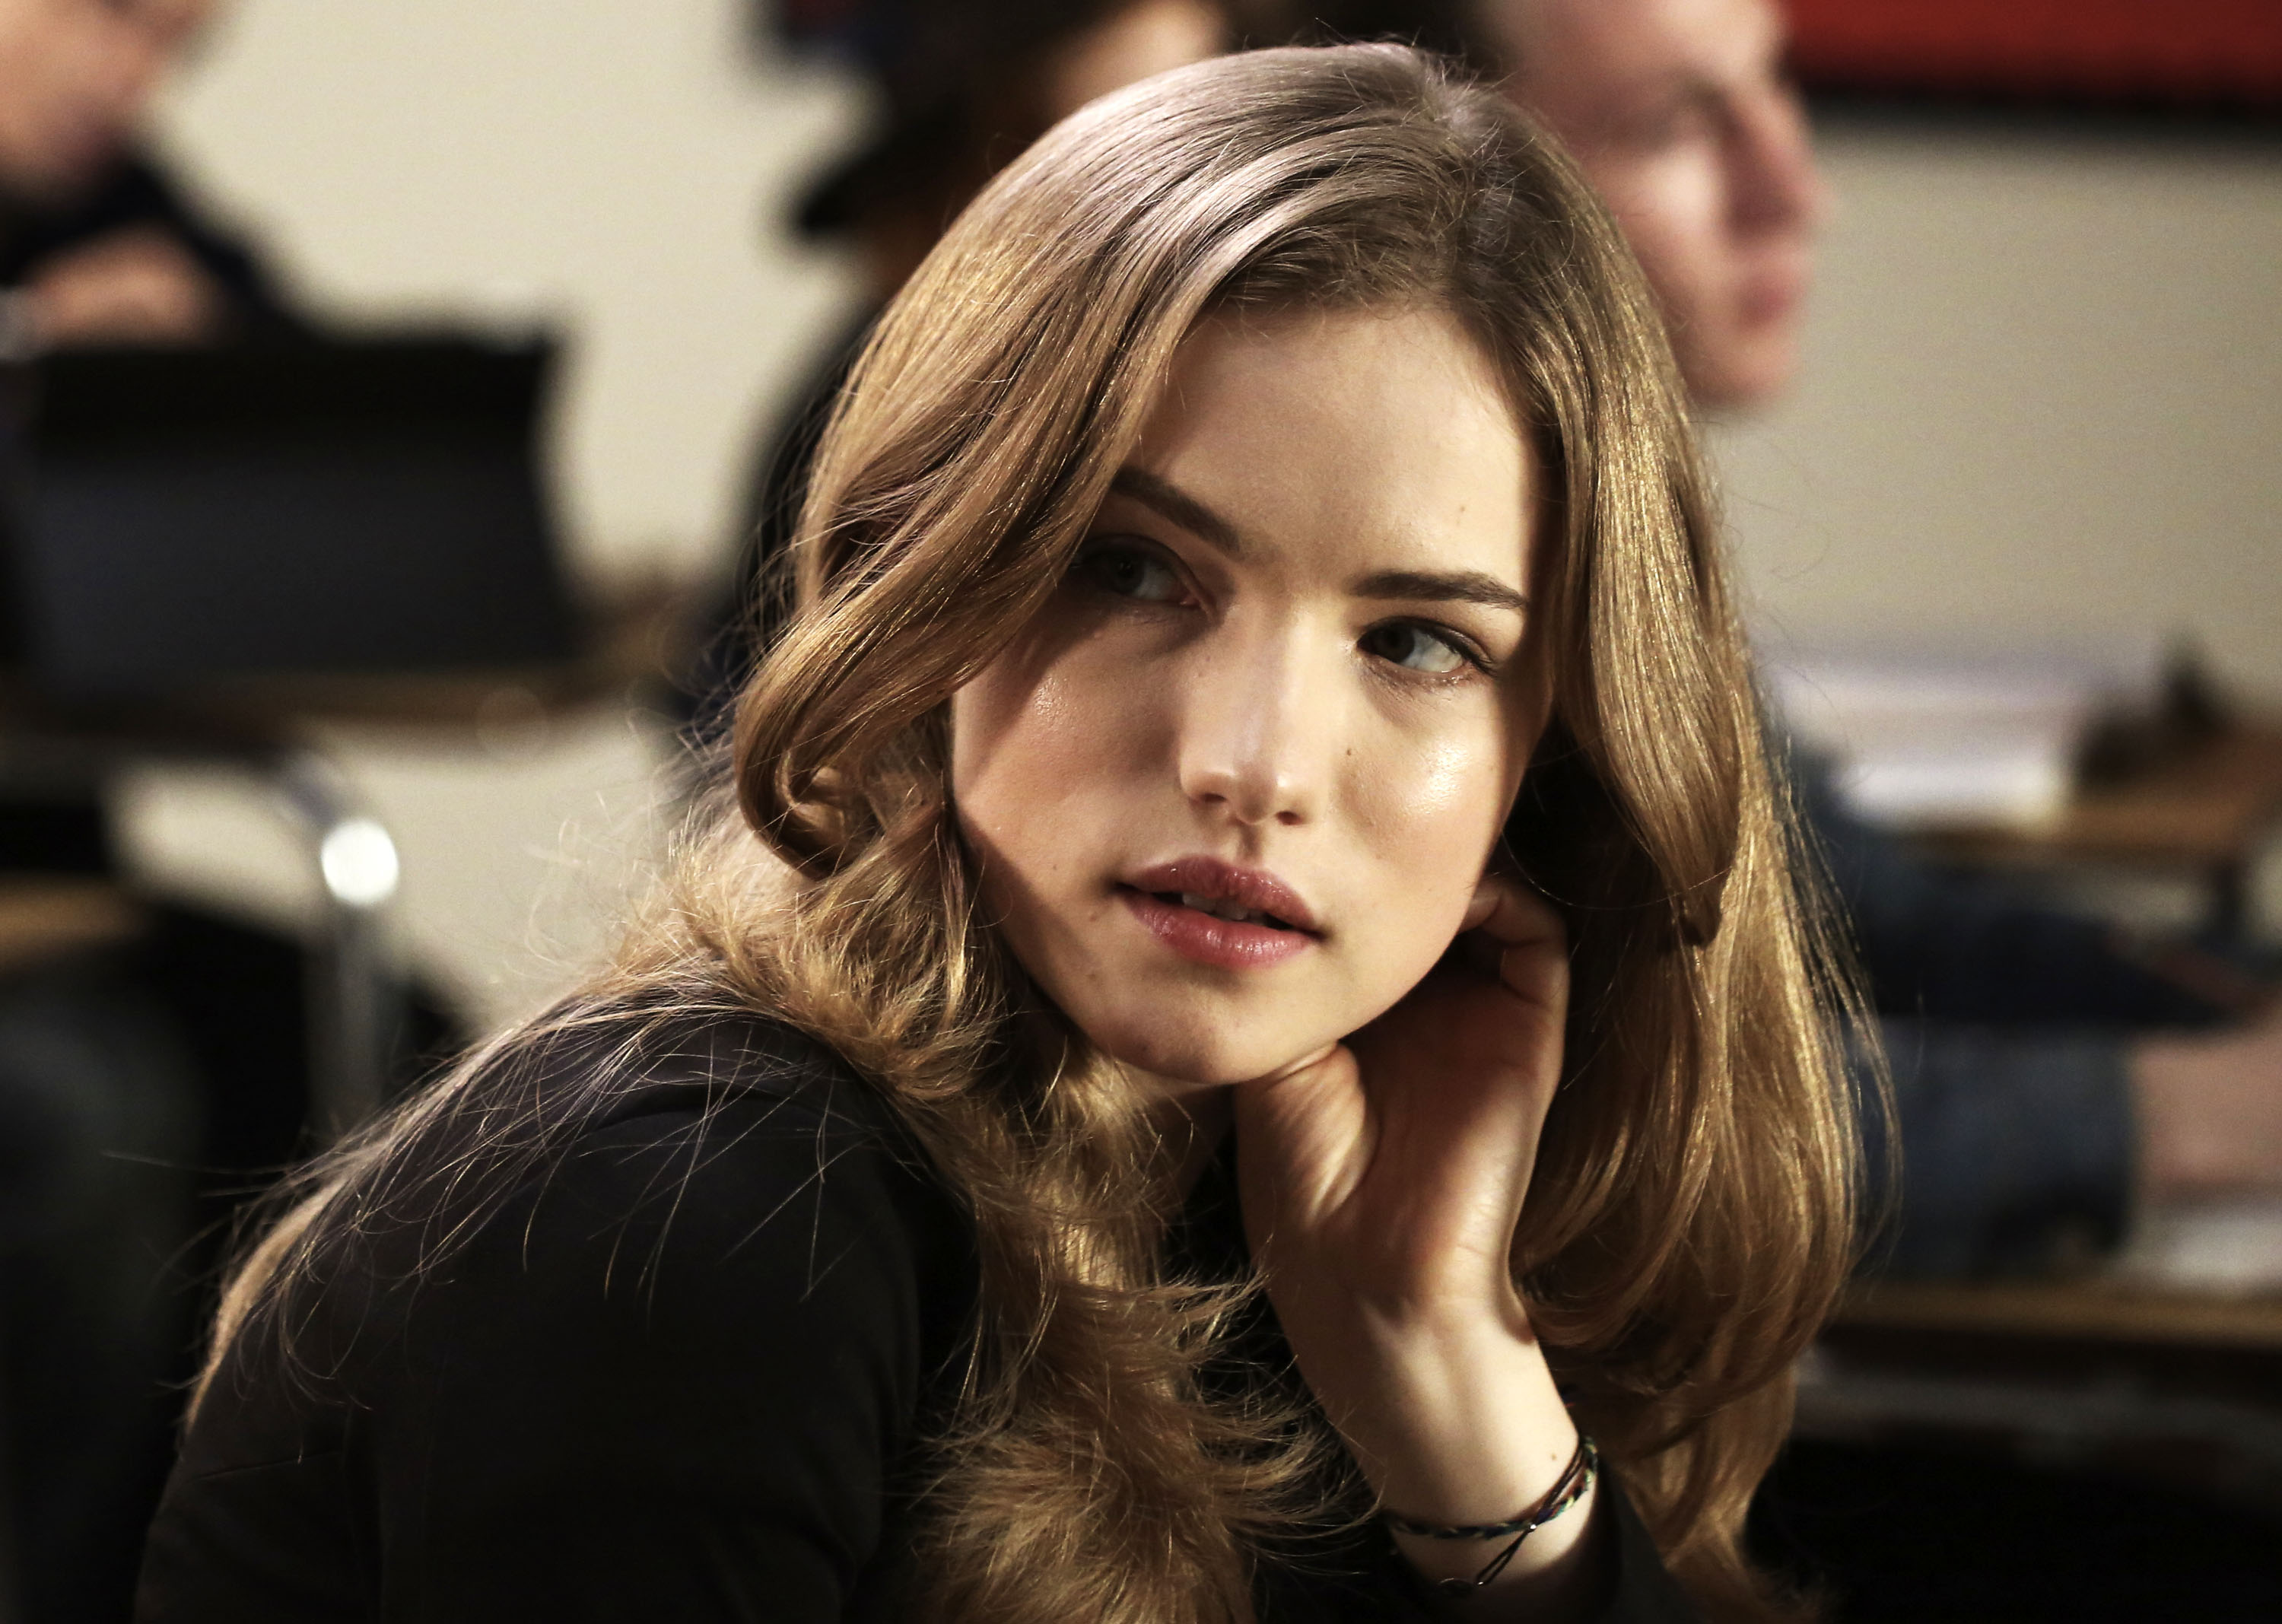 Scream Willa Fitzgerald, HD Tv Shows, 4k Wallpaper, Image, Background, Photo and Picture